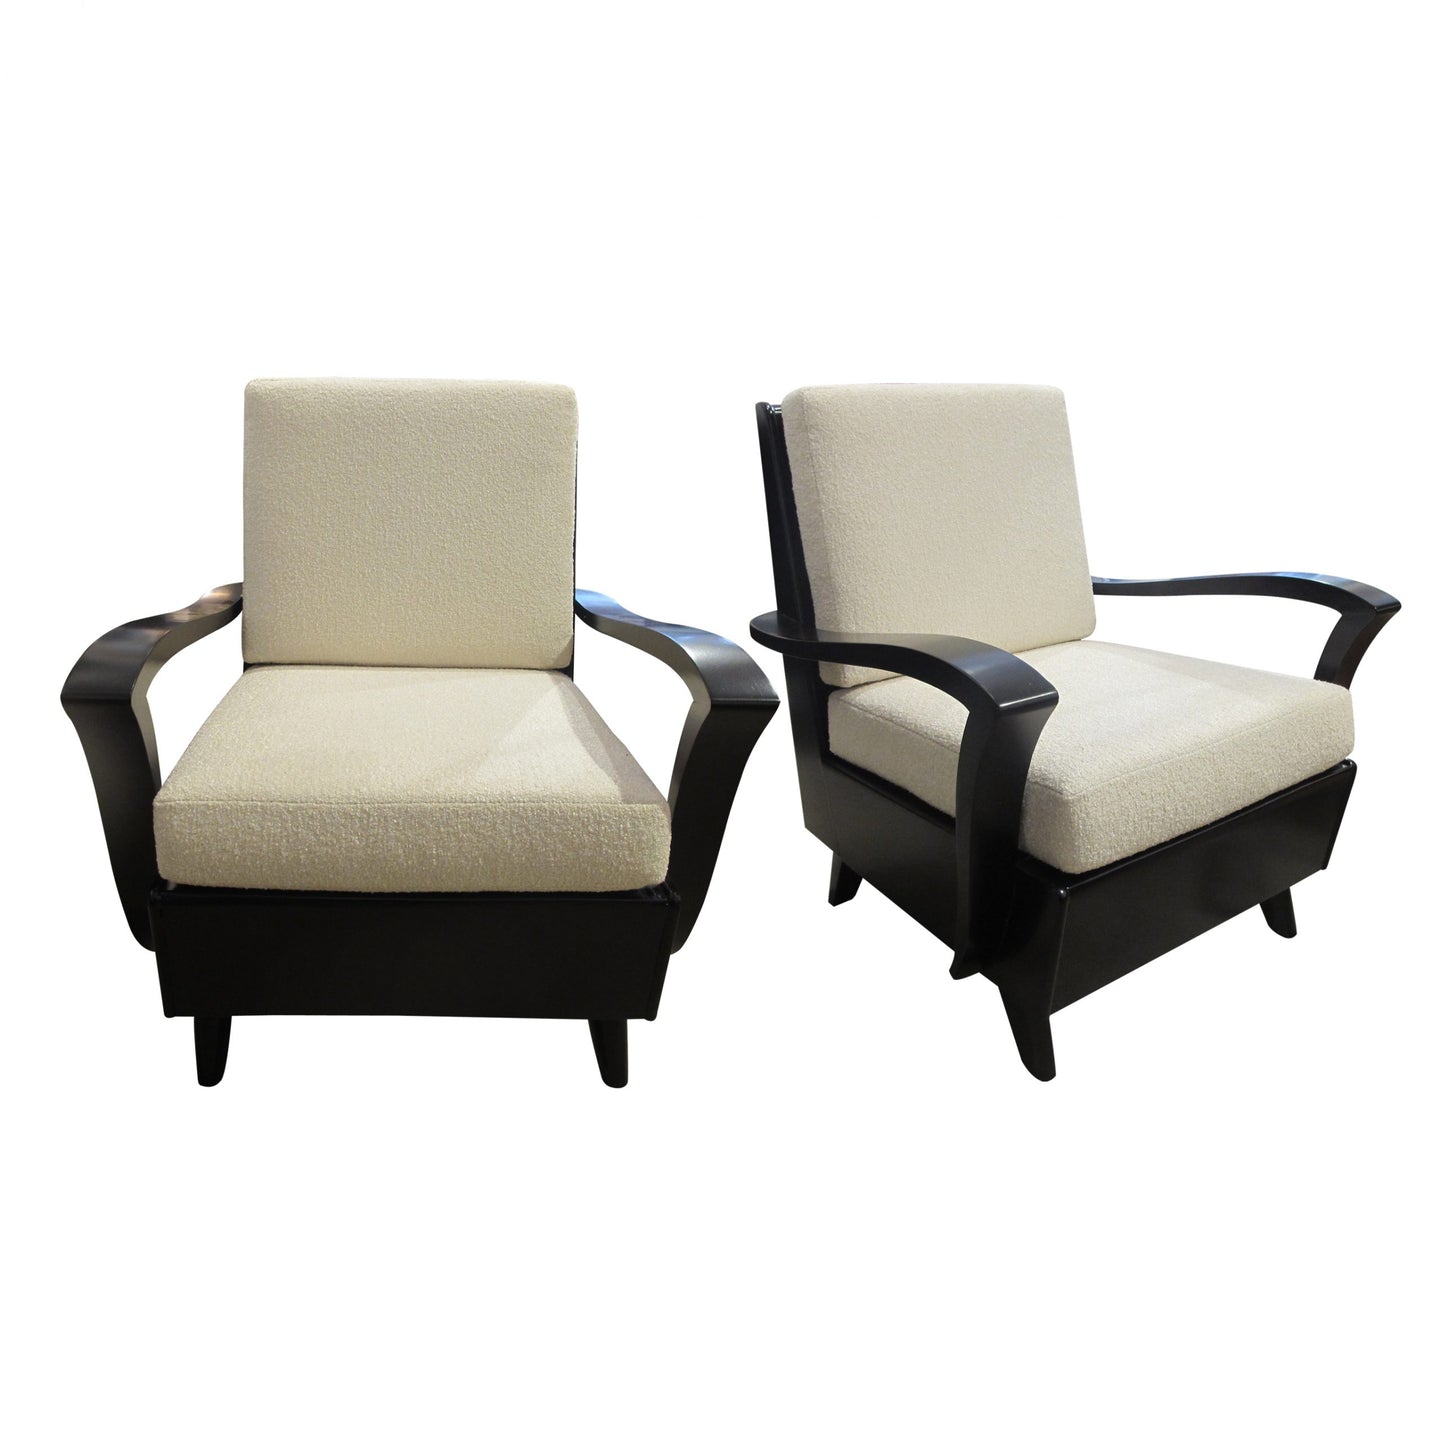 1930's French pair of armchairs